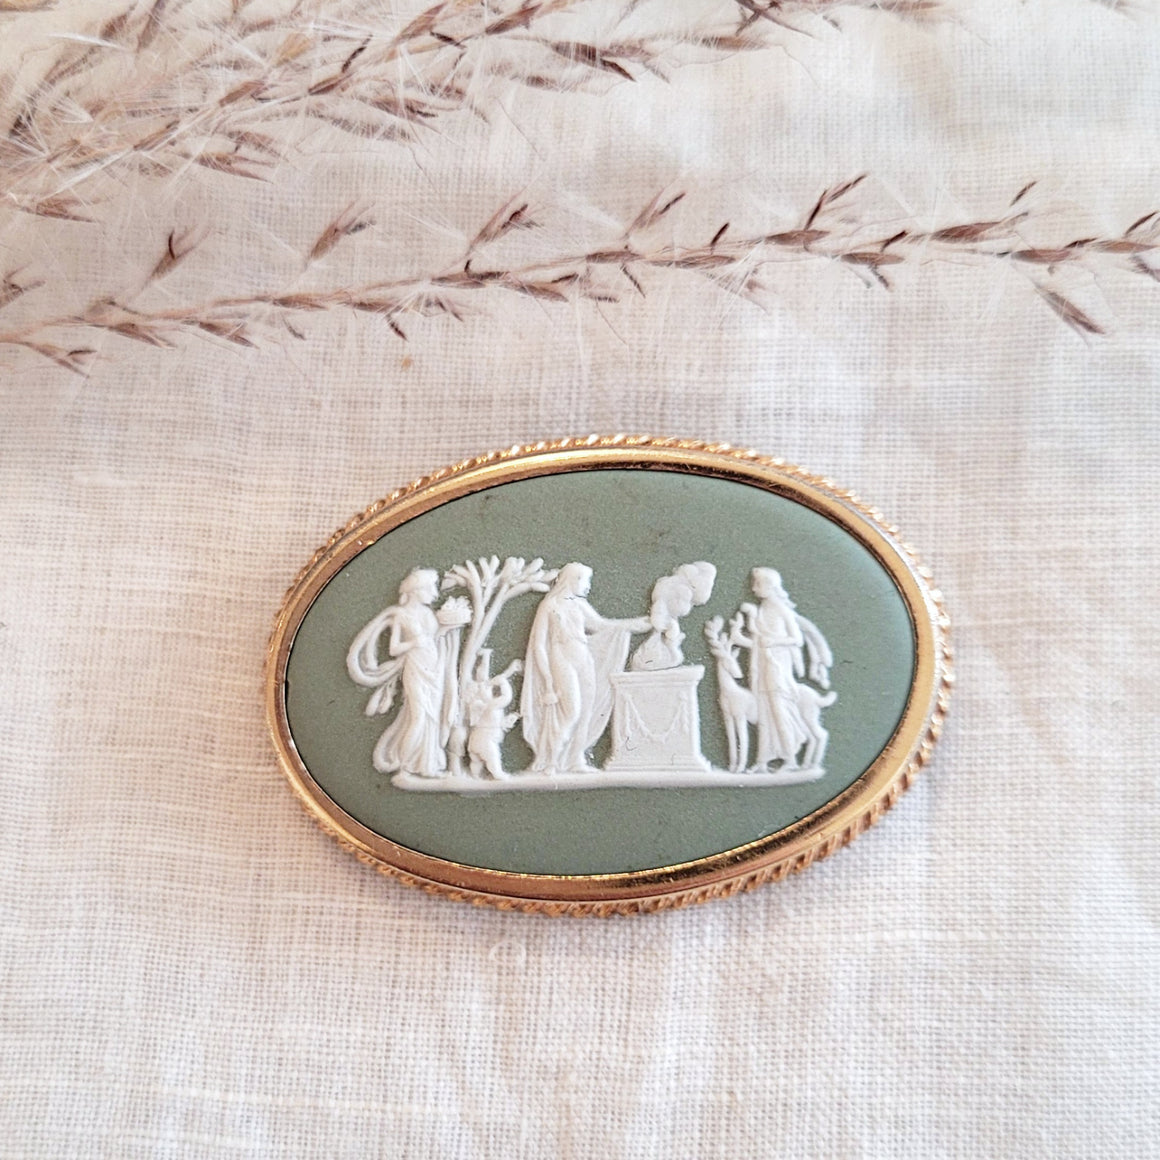 Gold filled medium  green and white Wedgewood cameo brooch, circa 1960